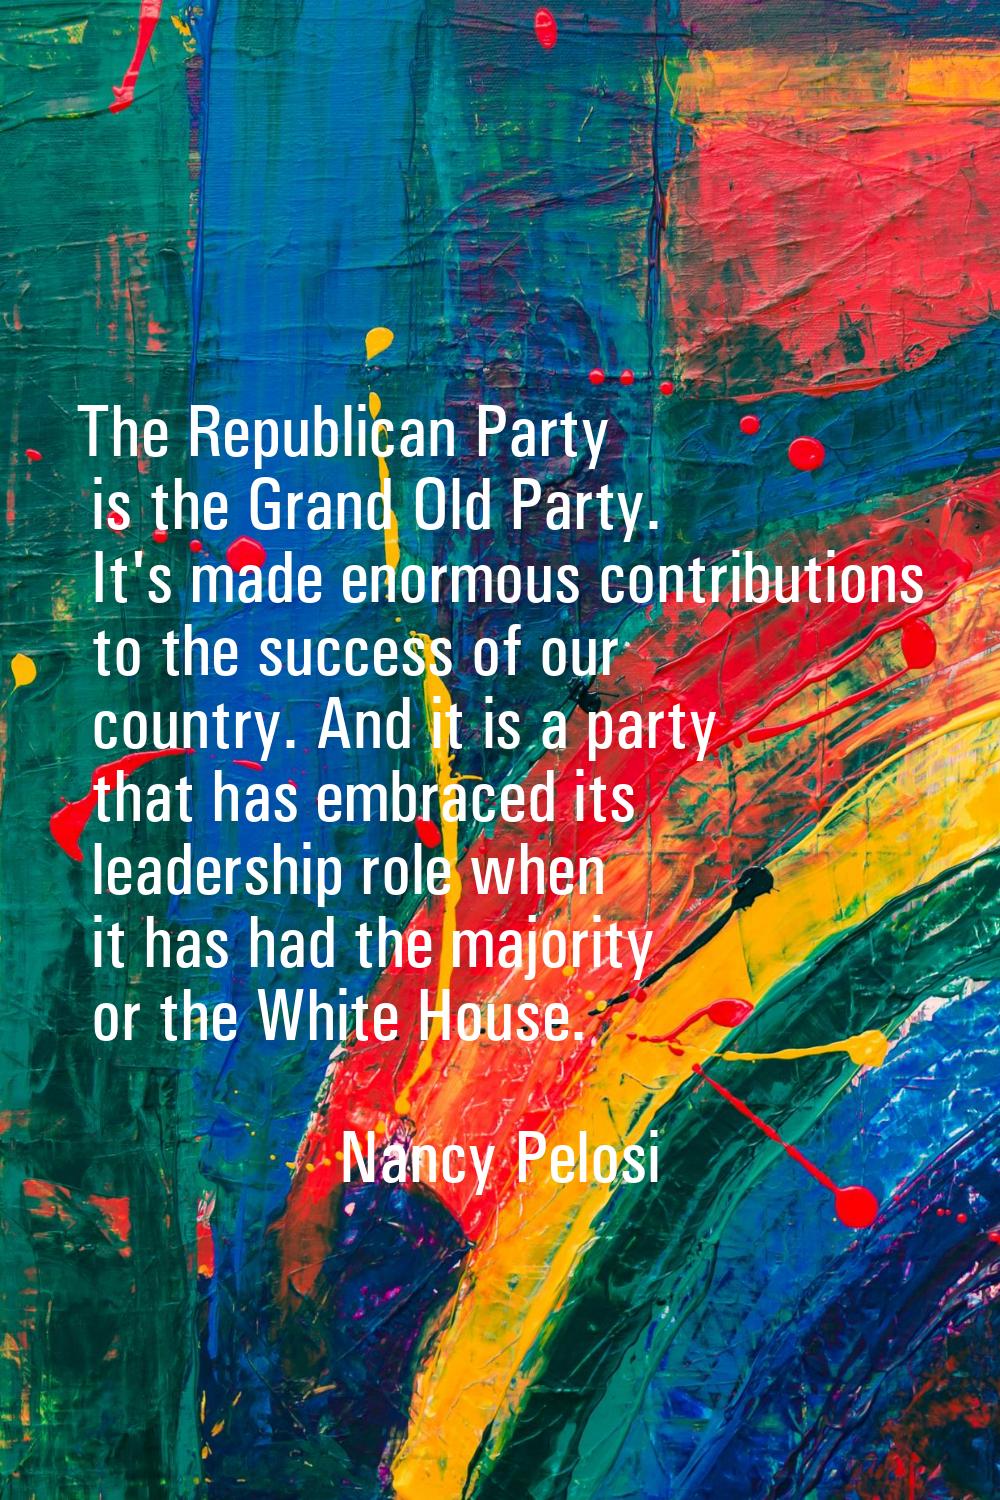 The Republican Party is the Grand Old Party. It's made enormous contributions to the success of our